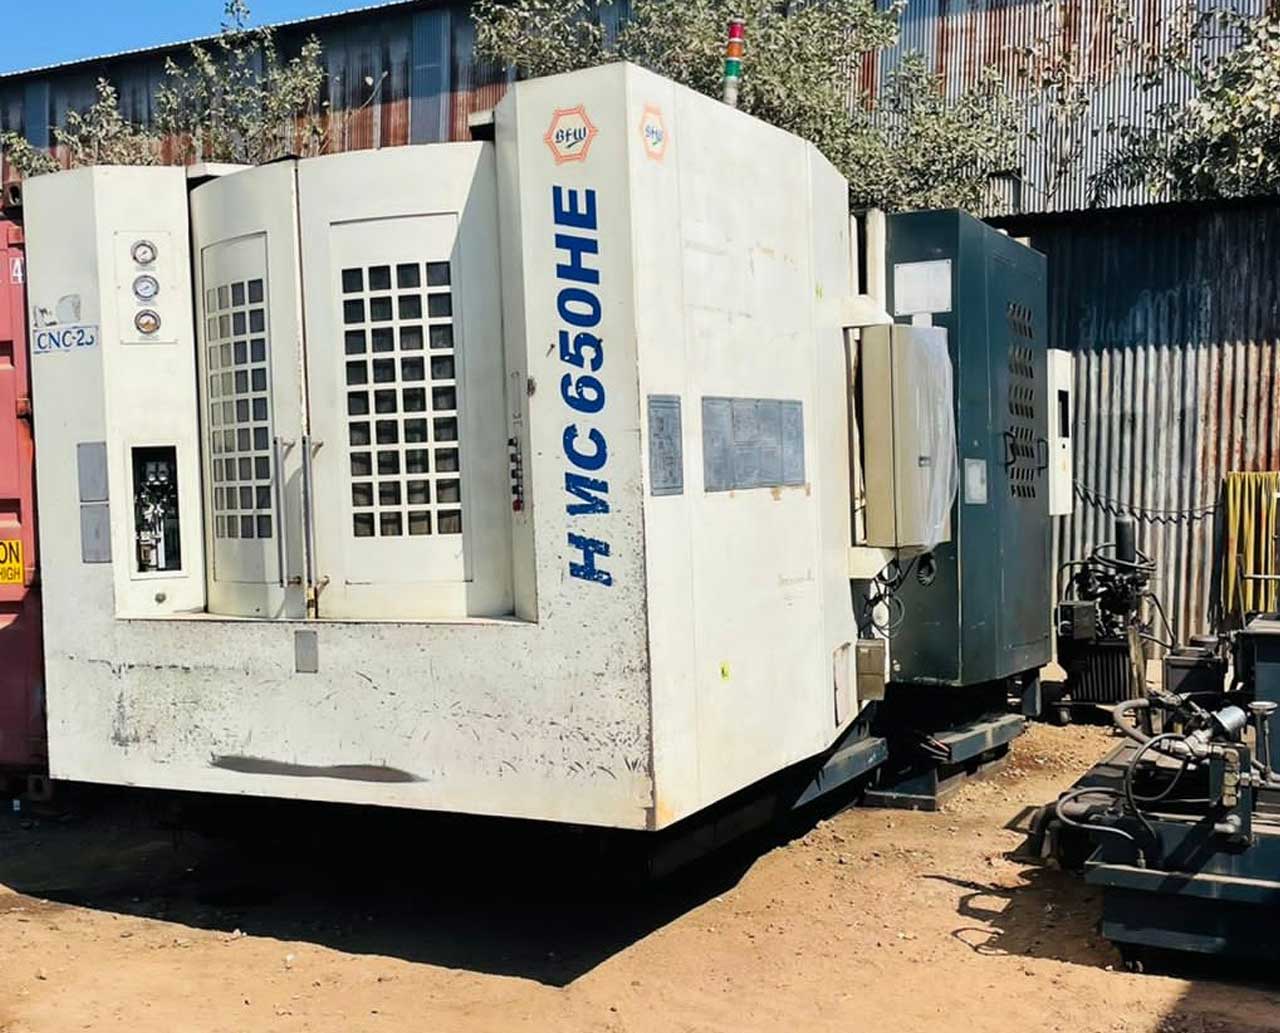 Used HMC Machine Suppliers and Dealers in Pune, Old, Second Hand and Refurbished Horizontal Machining Centers in Pune | Puja Enterprises